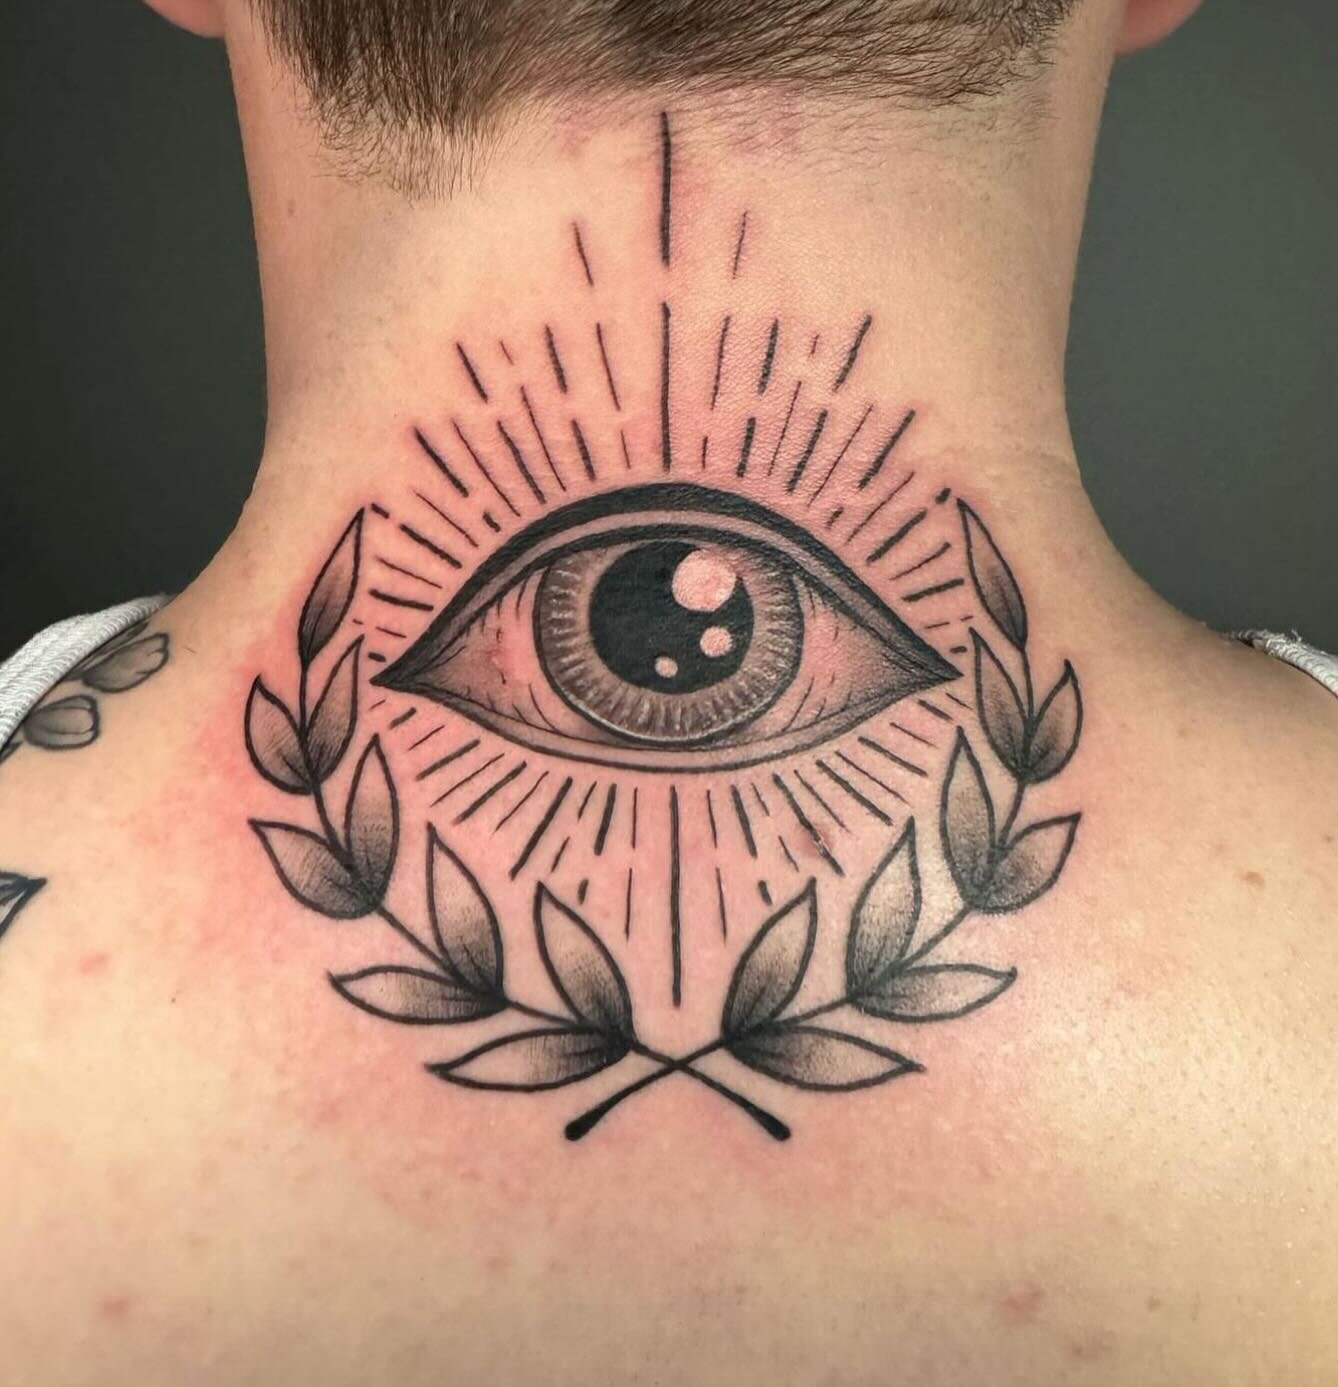 @nosoul got to do this cool eye 👁️ piece for a returning client. 

We love when clients come back to our artists with more ideas for art! 

Whether you&rsquo;re returning to the same artist or wanting to get a tattoo in the style of a different one,